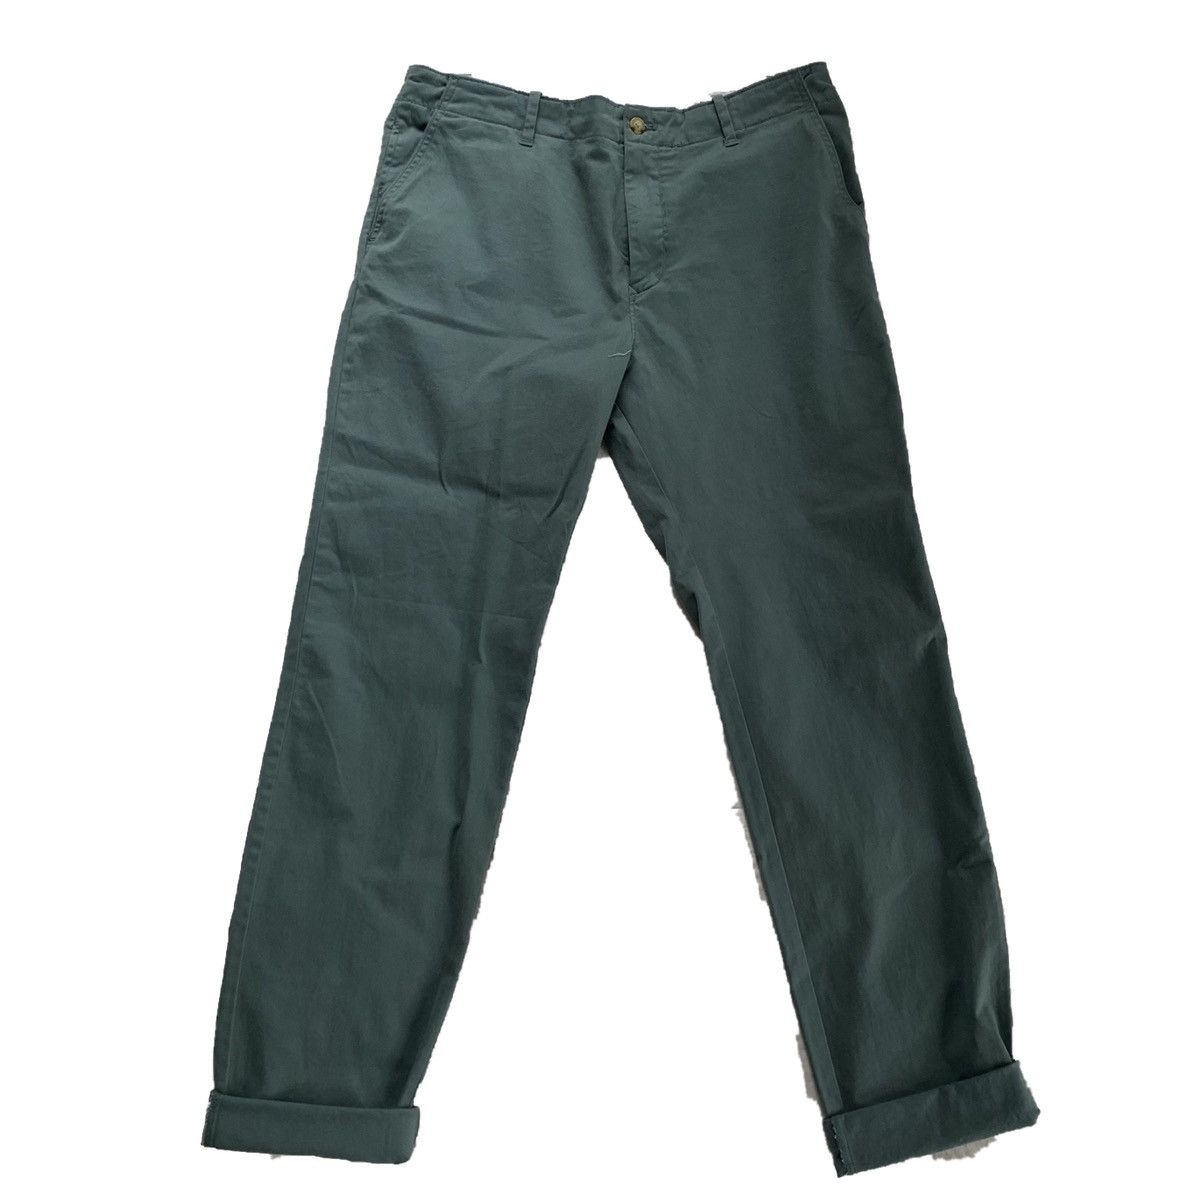 BDG Urban Outfitters Ripstop Utility Cargo Pants